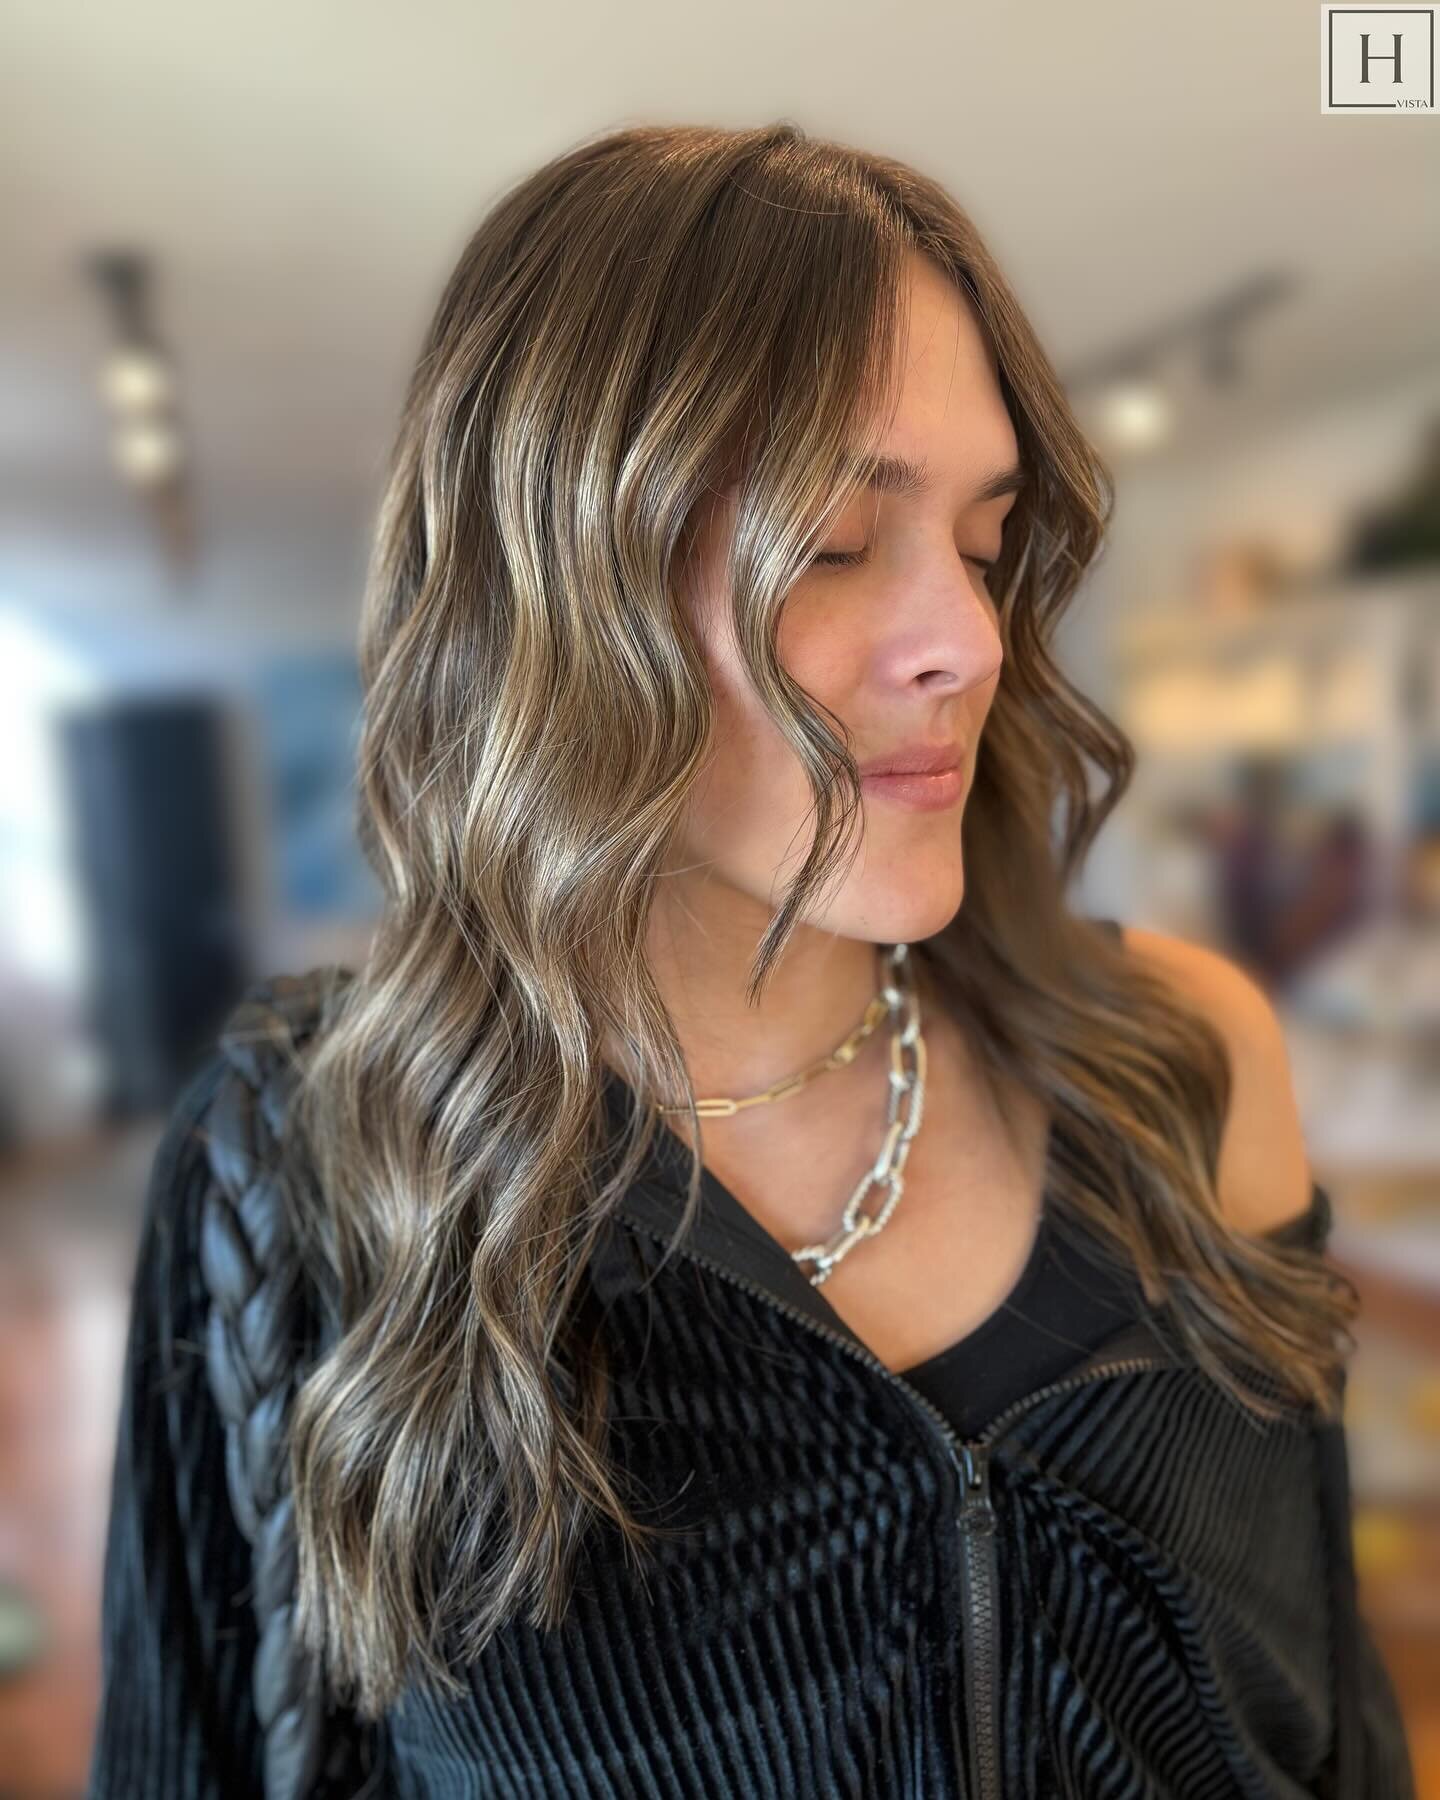 Comment below with your New Year&rsquo;s resolutions!! 🎆 Hopefully regularly scheduled hair appointments at Hyde made the list! 😉

Stylist: @maceydidmyhair 

#hairstylist #hairsalon #hydevista #hydesalon #columbiasc #thevista #downtowncola #newyear